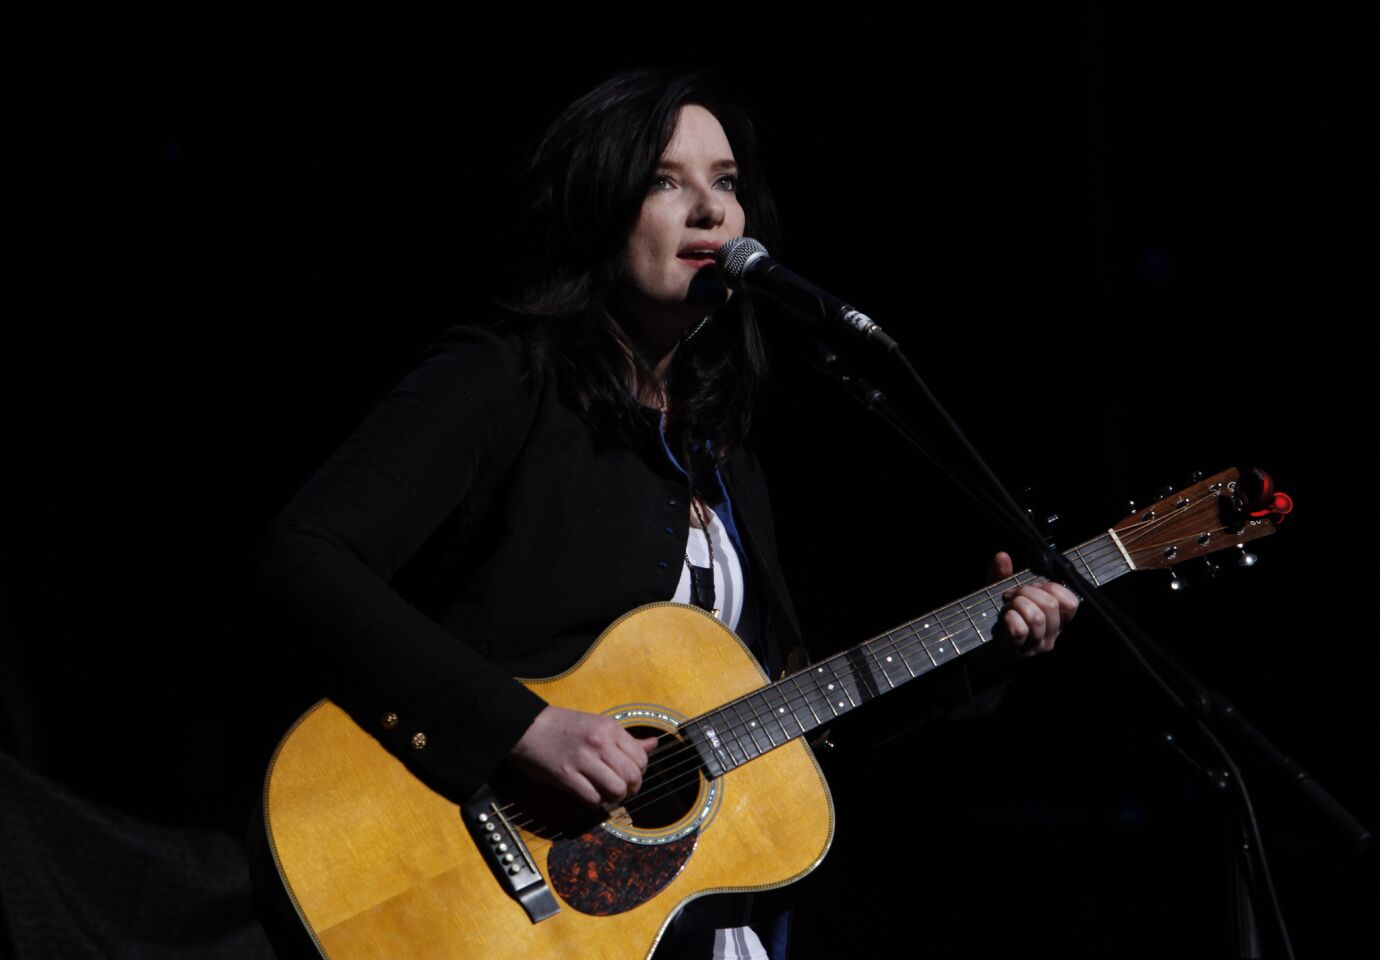 Brandy Clark performs as part of Alan Jackson's Keepin' It Country tour at the Nokia Theatre on Feb. 27.